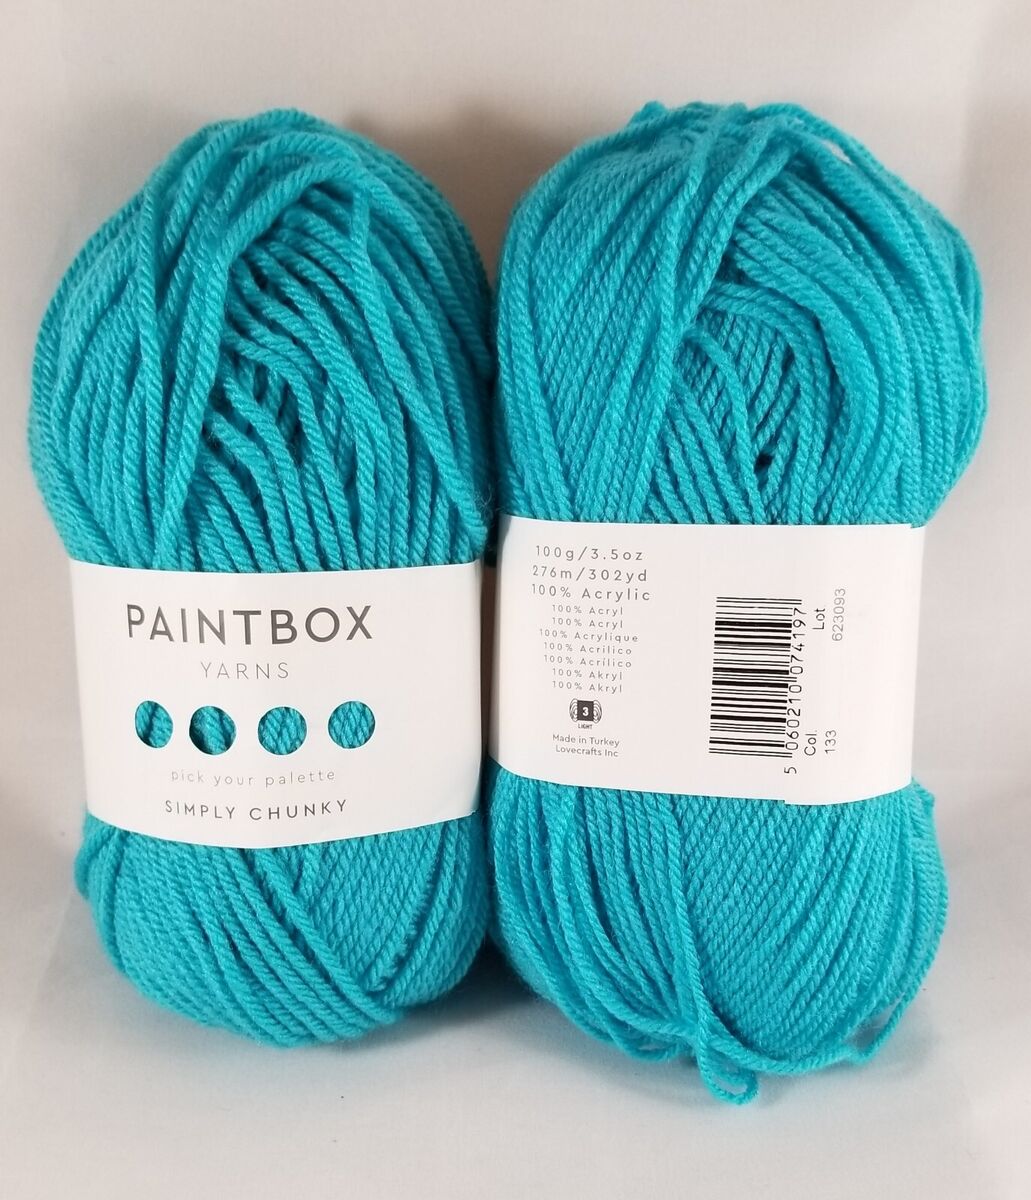 Paintbox Yarns – Pick your palette